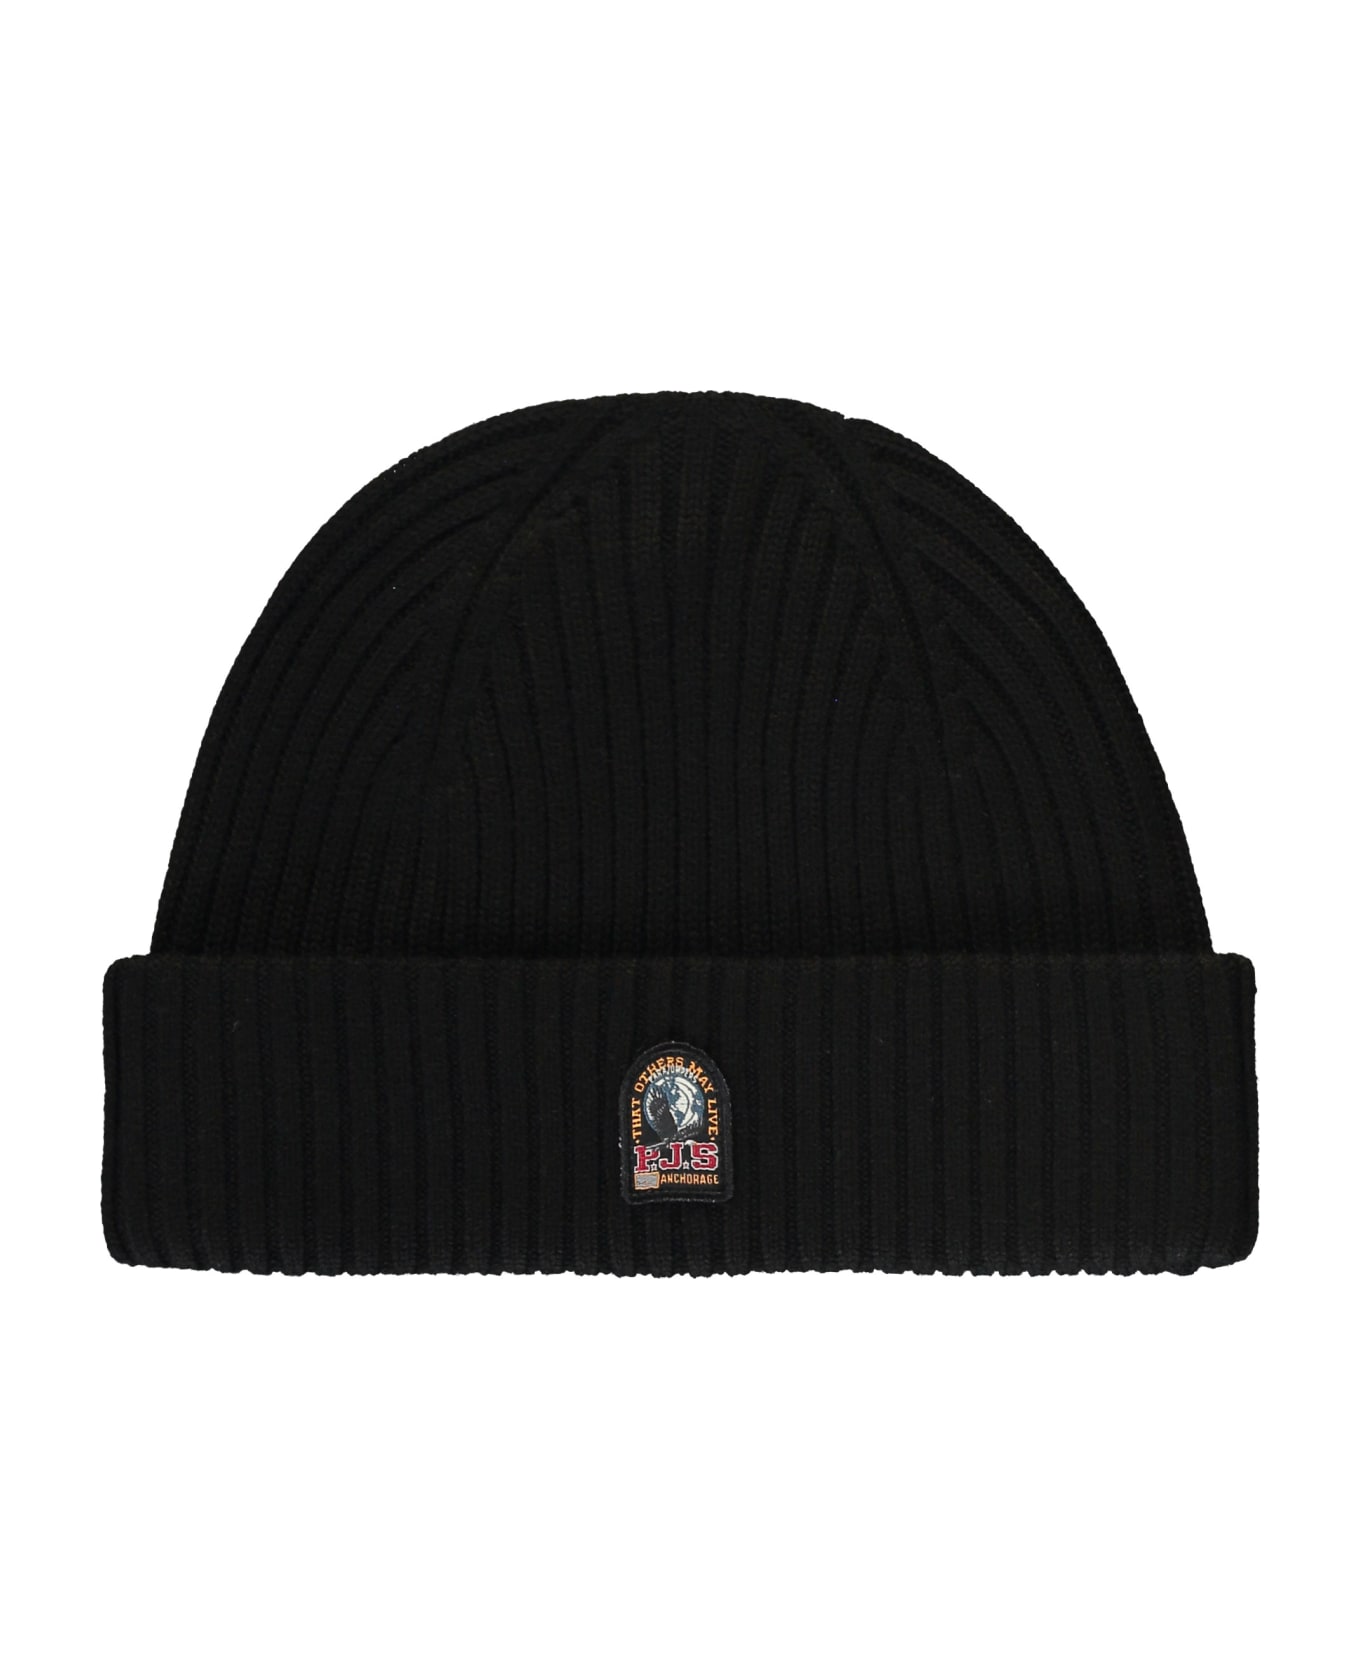 Parajumpers Ribbed Knit Beanie - black